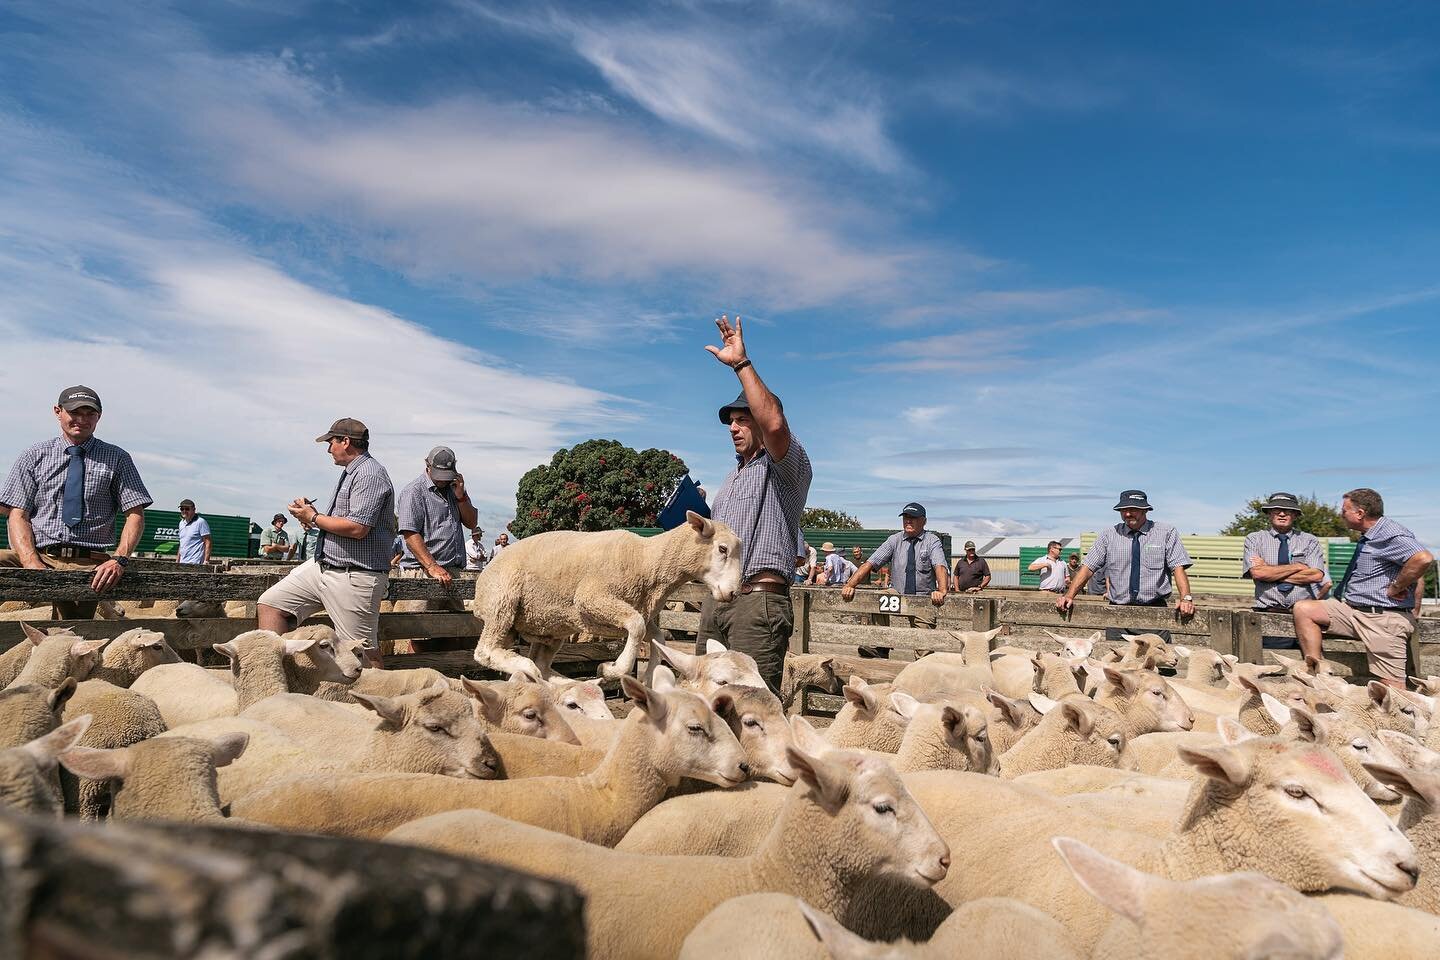 Wee throw back to shorts weather and casual sheep levitation with the @pgwlivestock sales team in action at the Feilding sale yards. 

#ruralnz
#newzealandlife 
#pggwrightson 
#feilding 
#sheeplife 
#agvocate 
#usetheforce